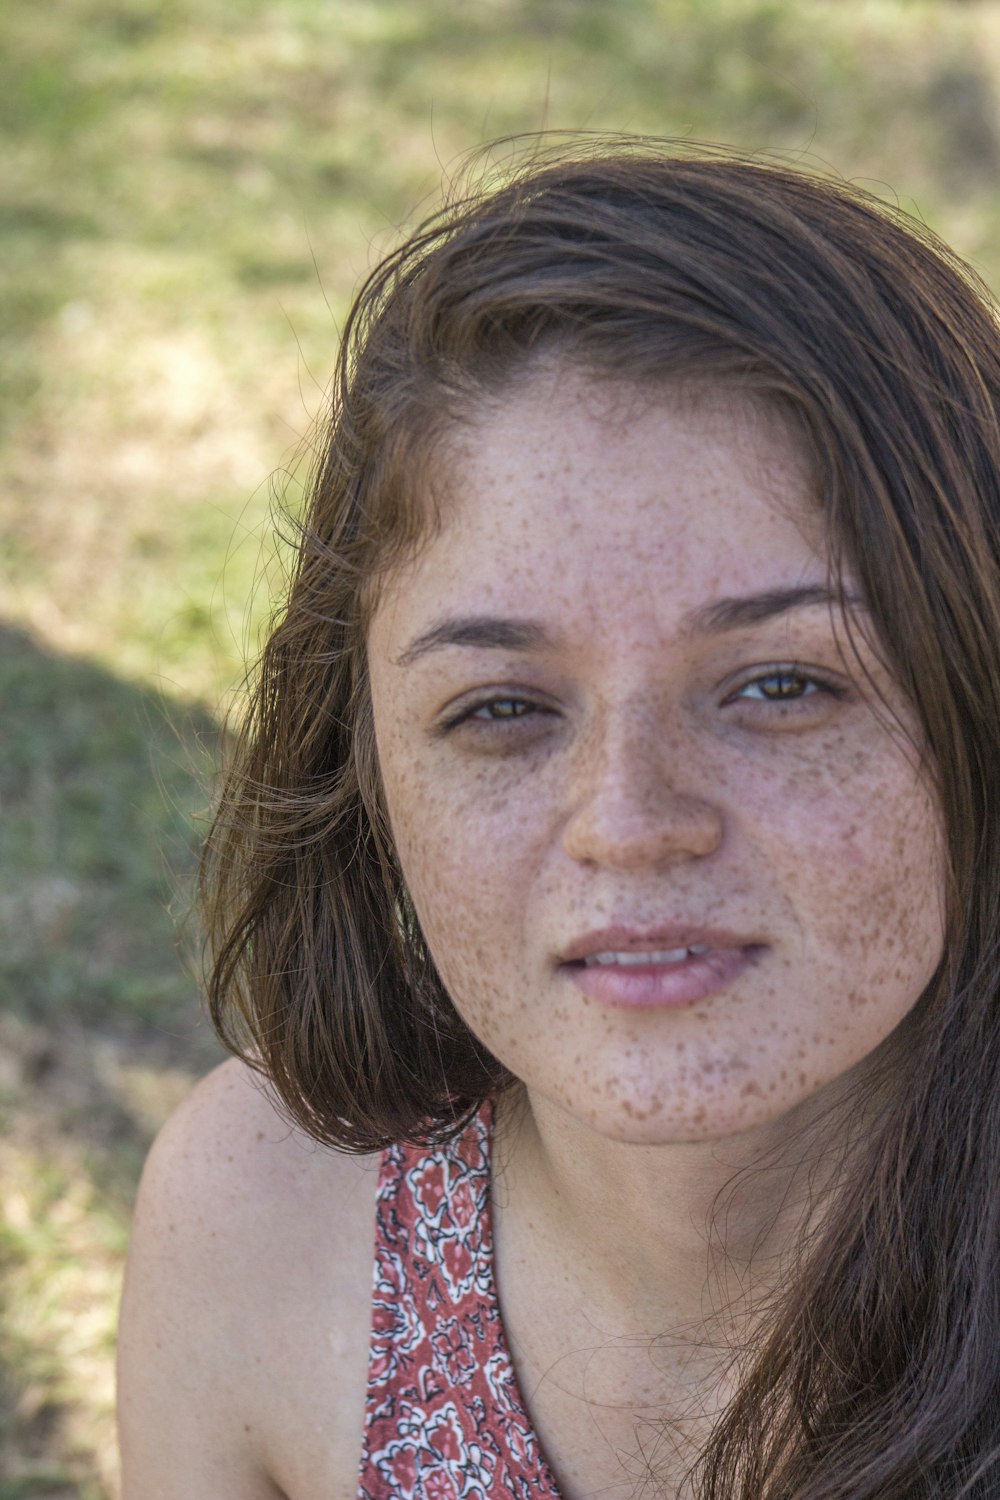 a woman with freckles on her face and freckles on her hair